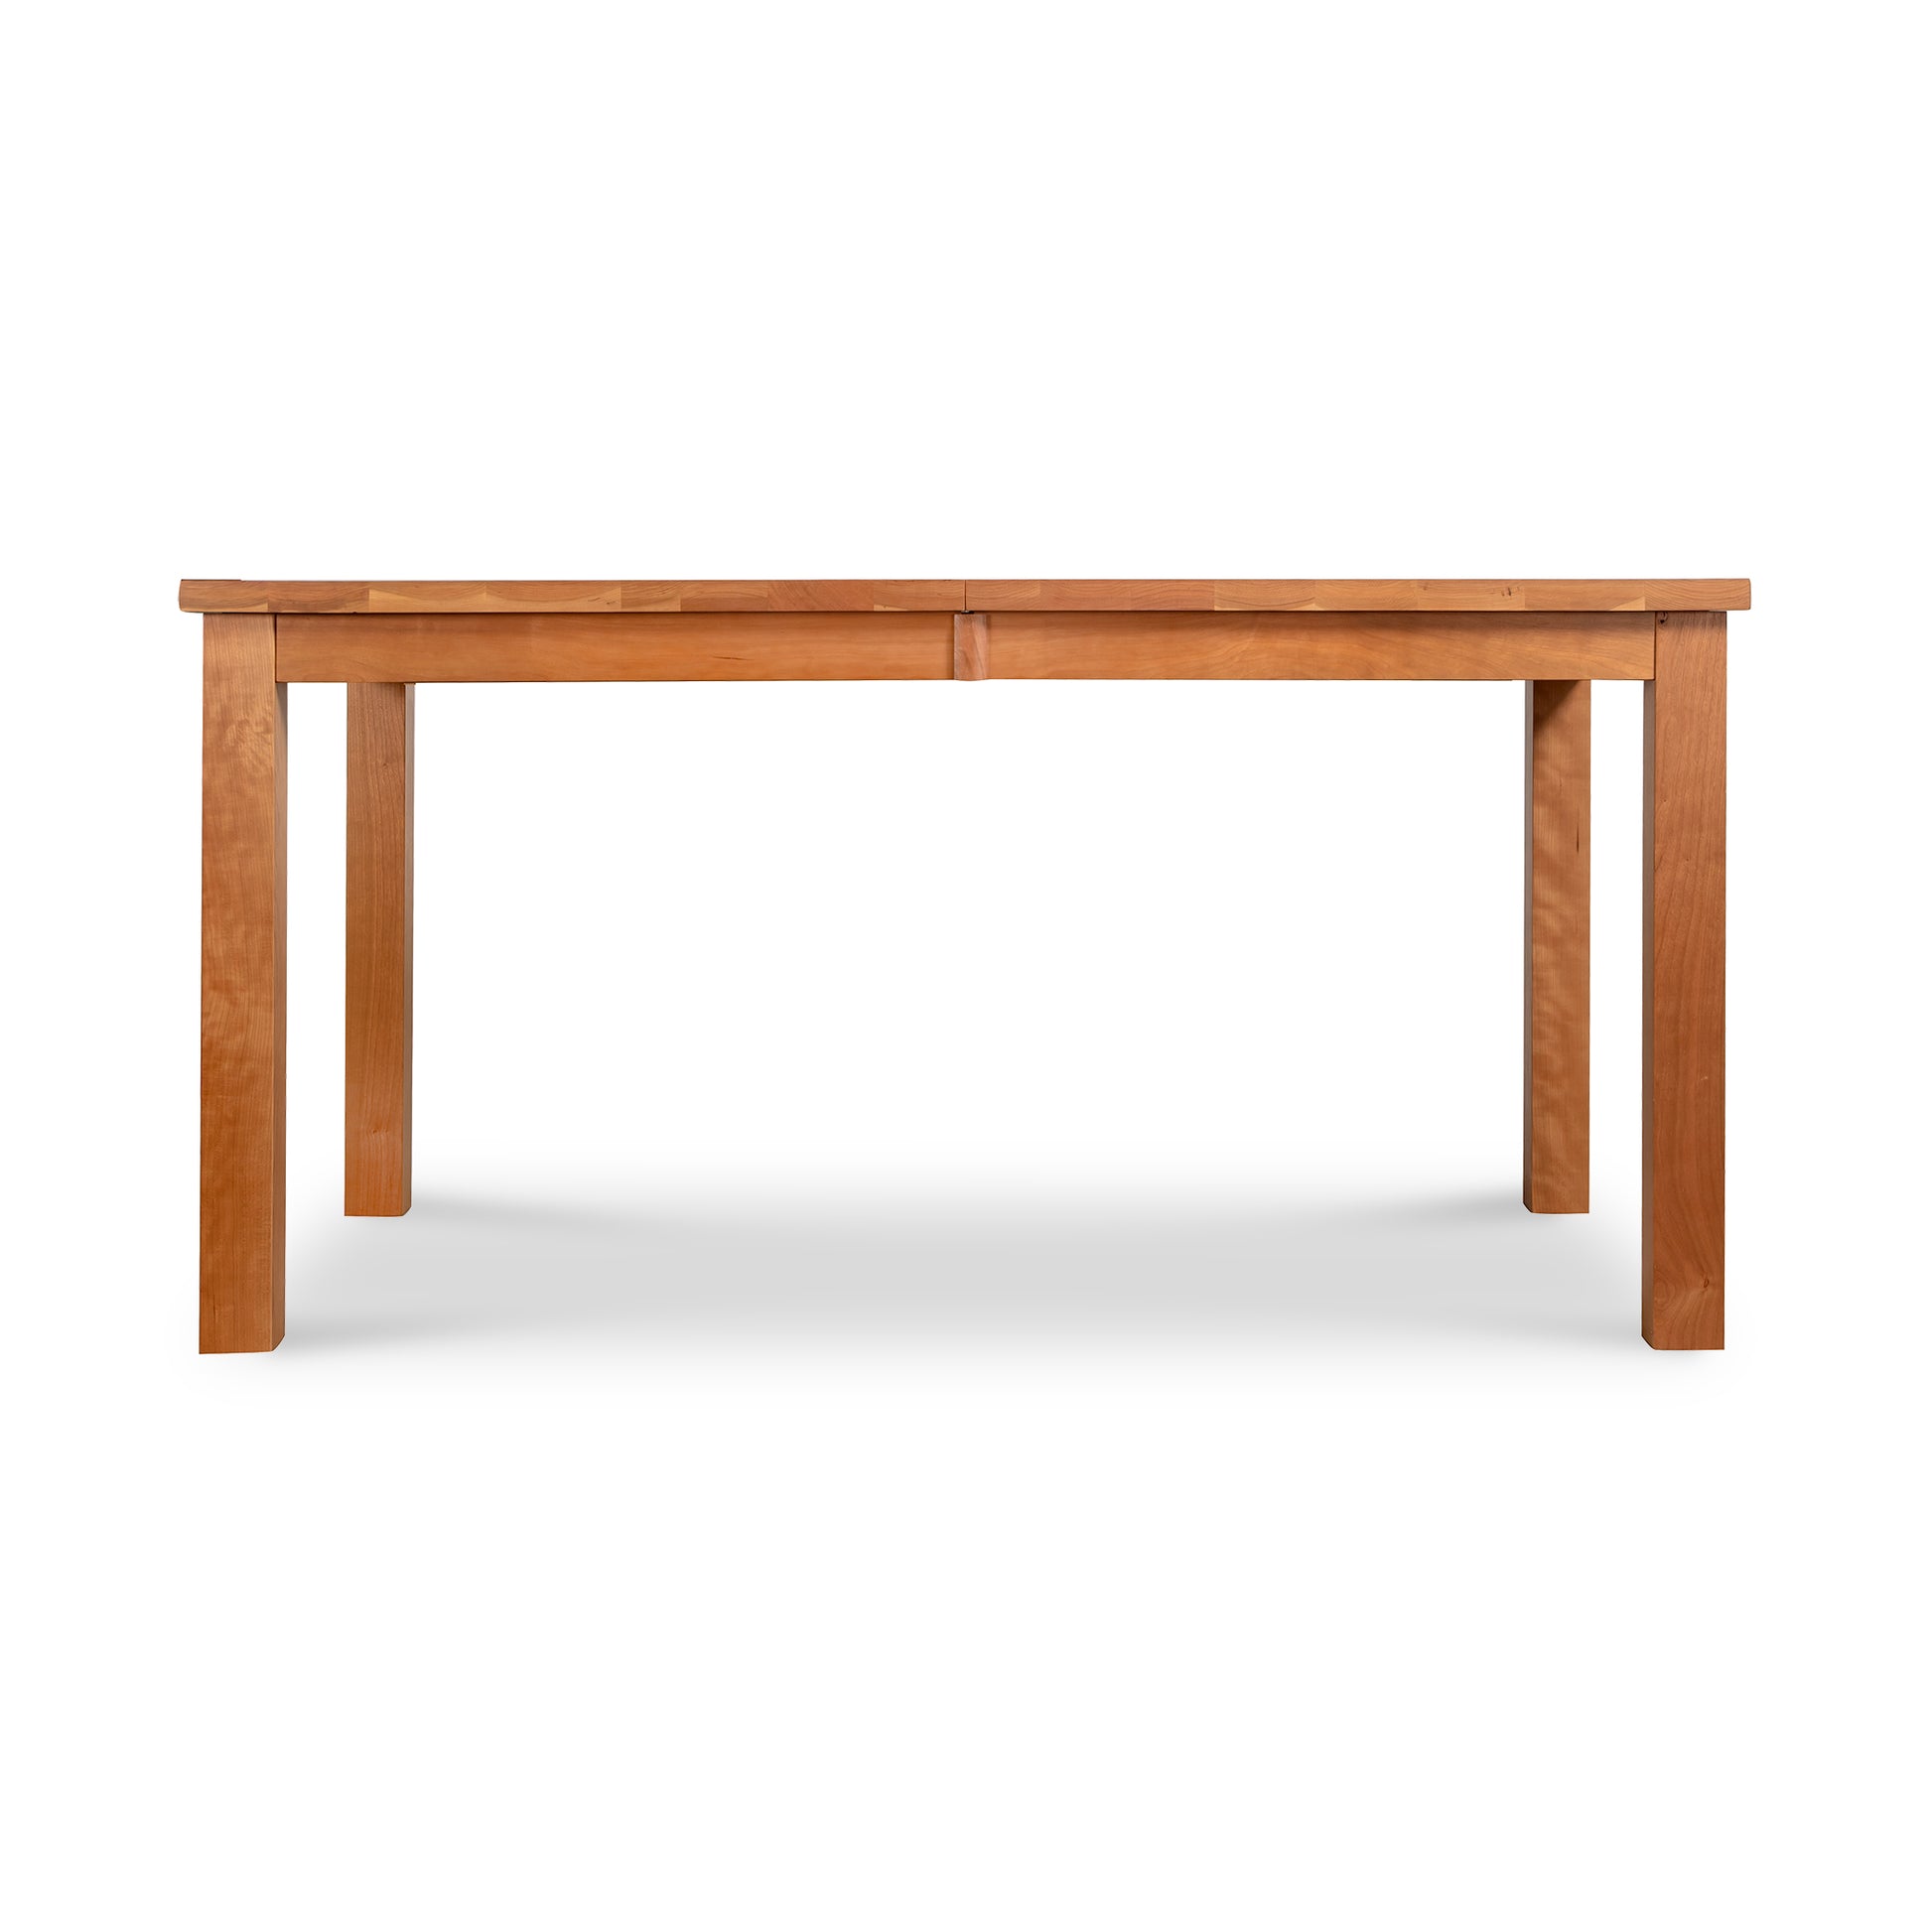 An eco-friendly Lyndon Furniture Modern Mission Parsons Extension Table - Floor Model on a white background.